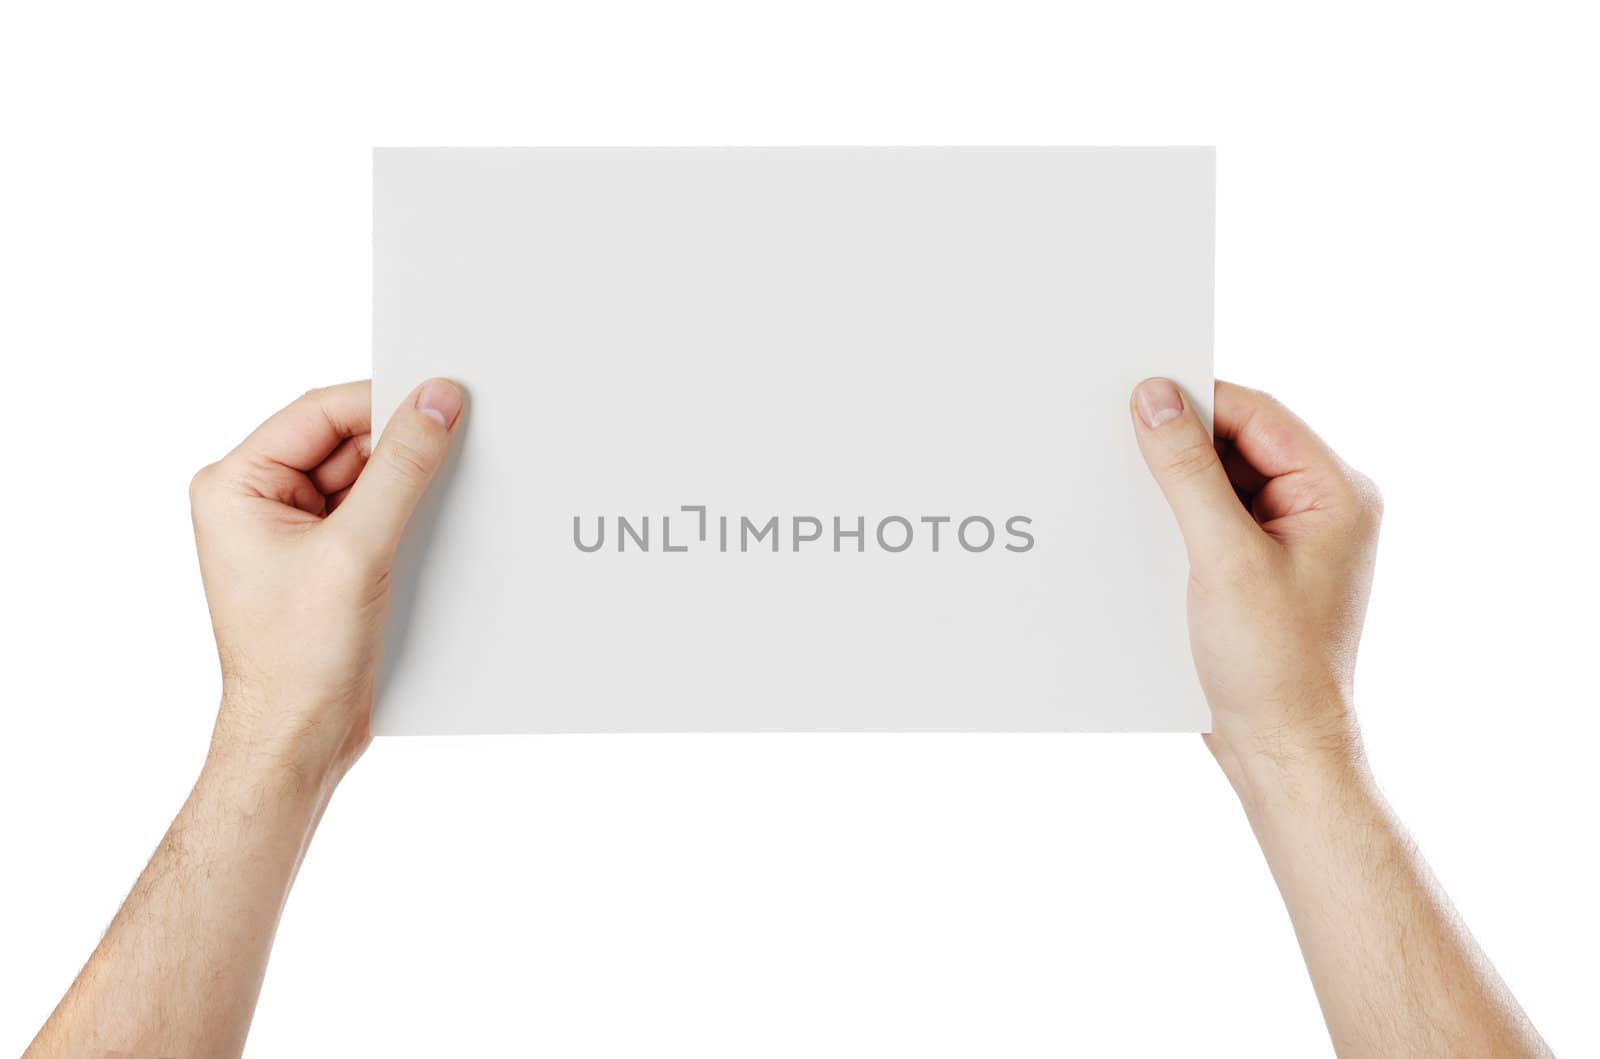 Man holding a light grey peper in his hand against white background.